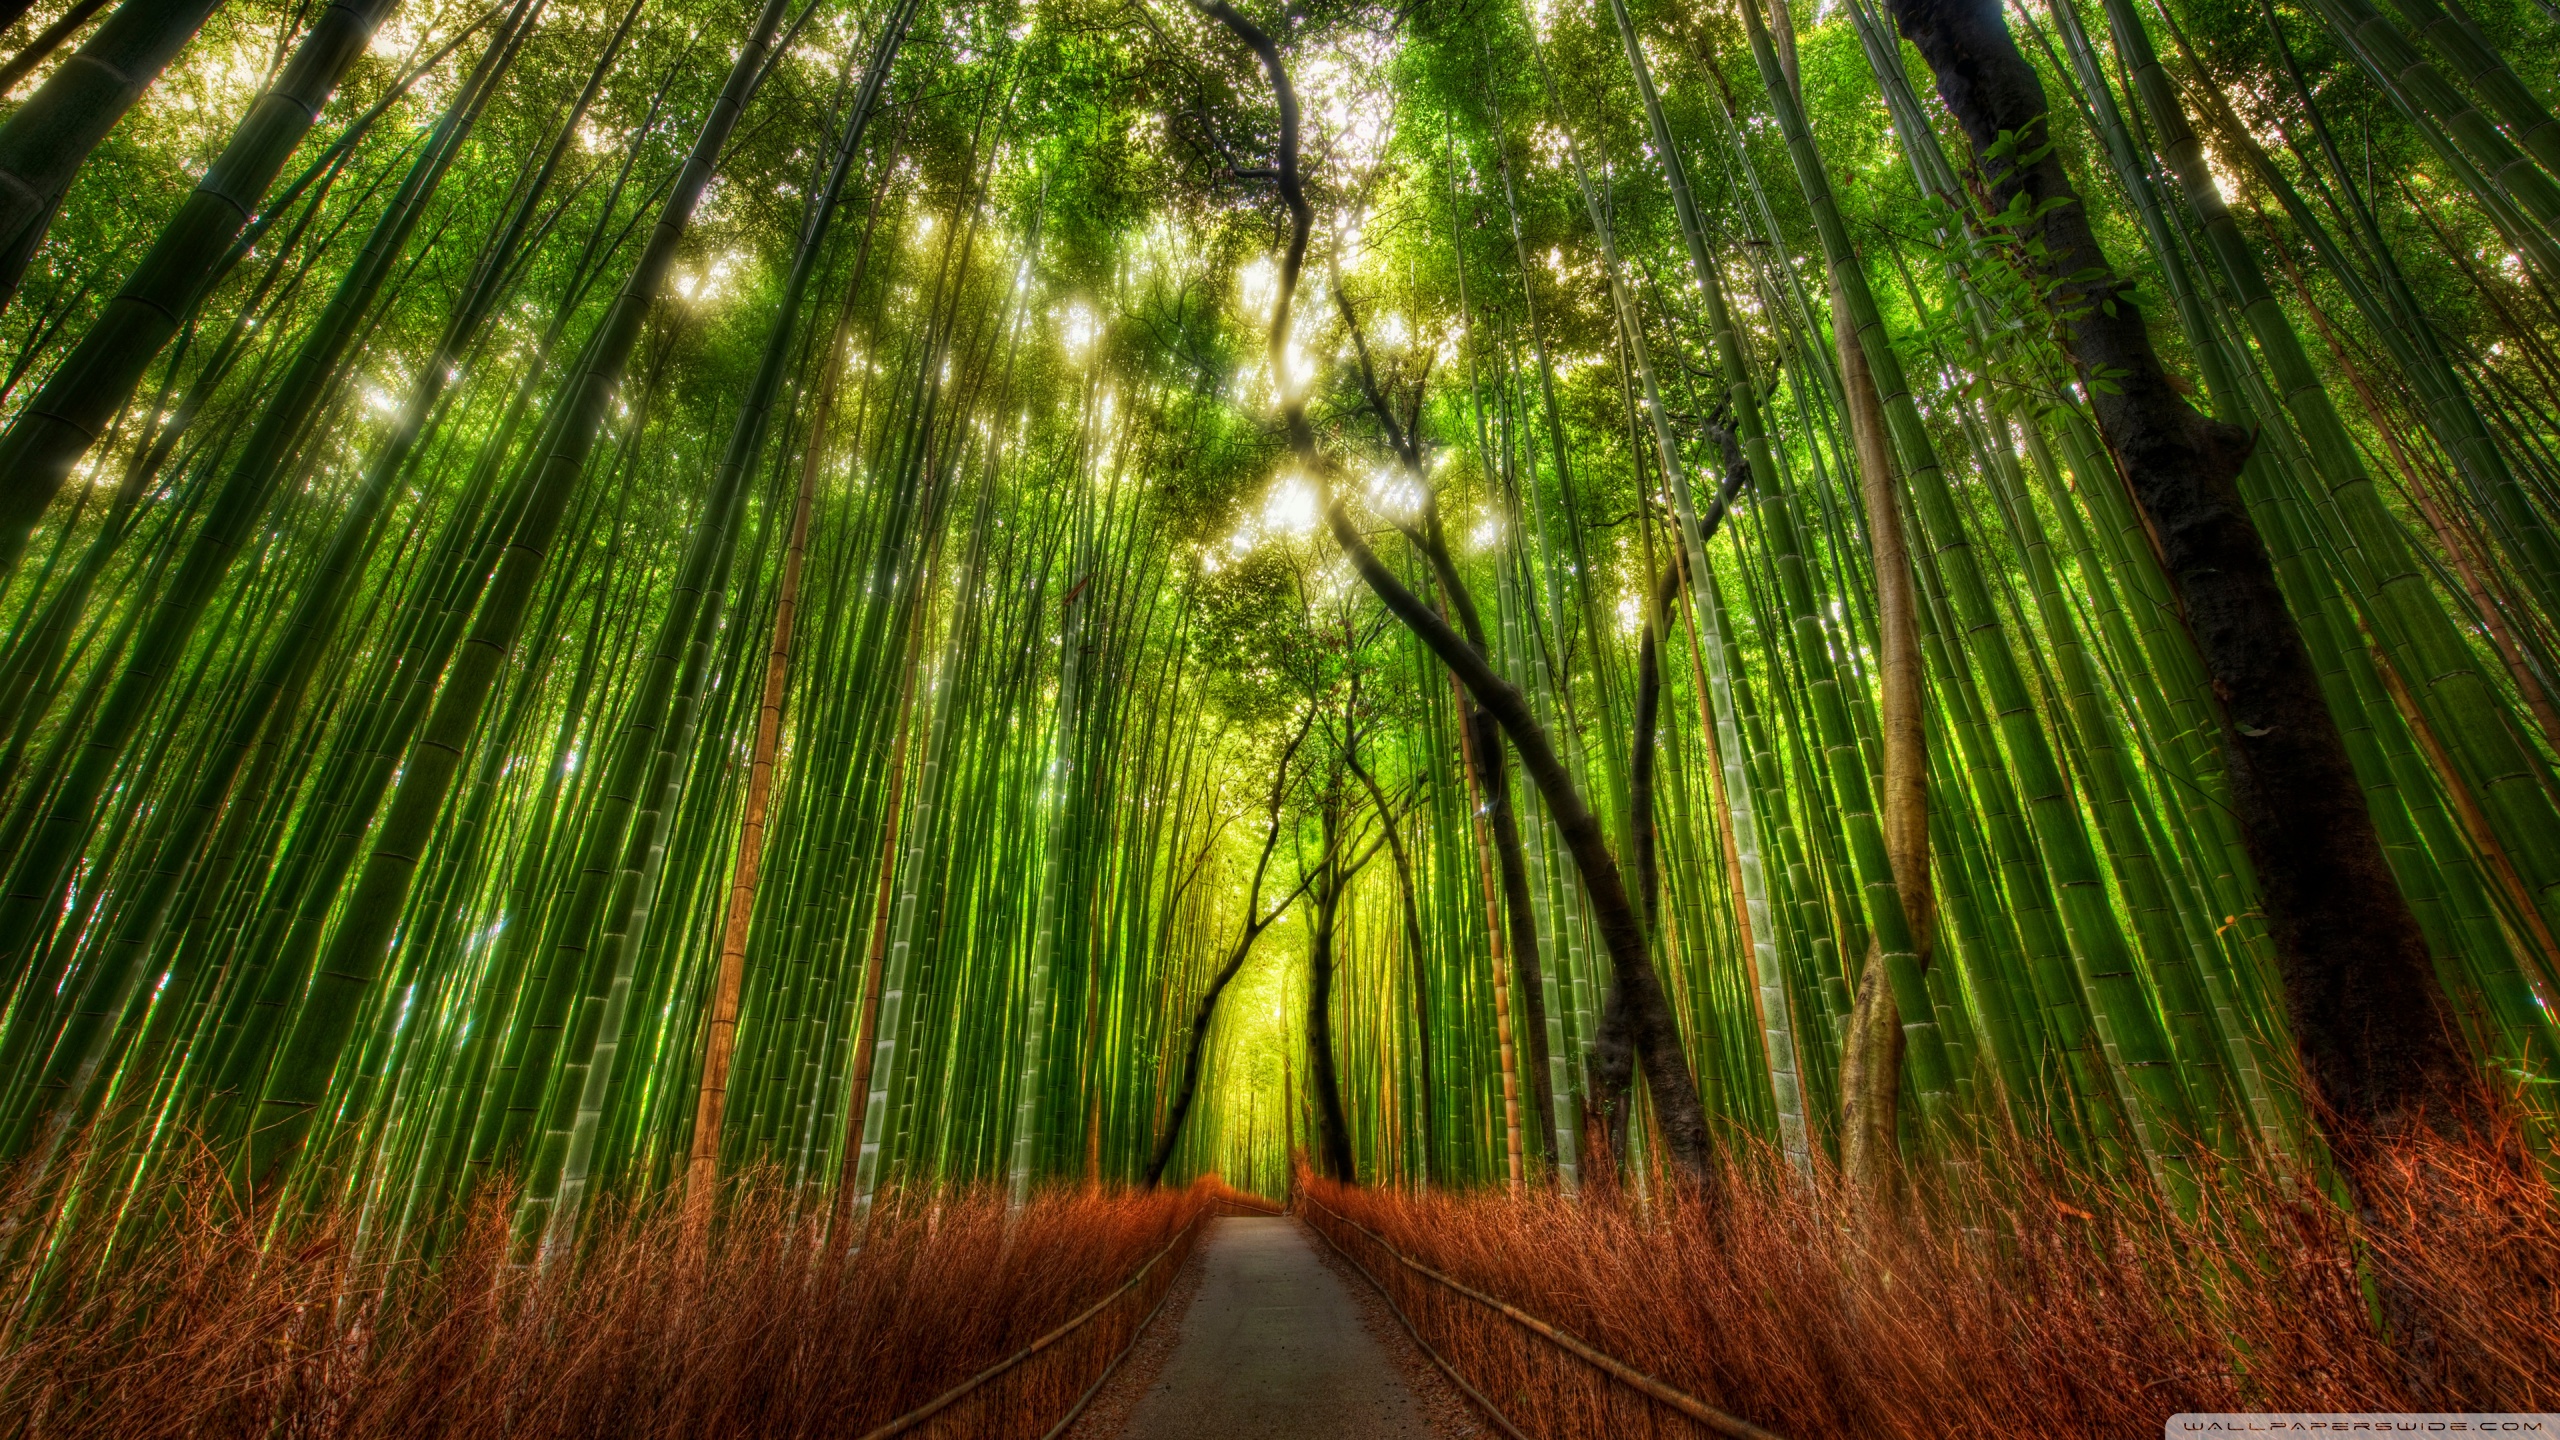 300 Free Bamboo Forest  Bamboo Images  Pixabay